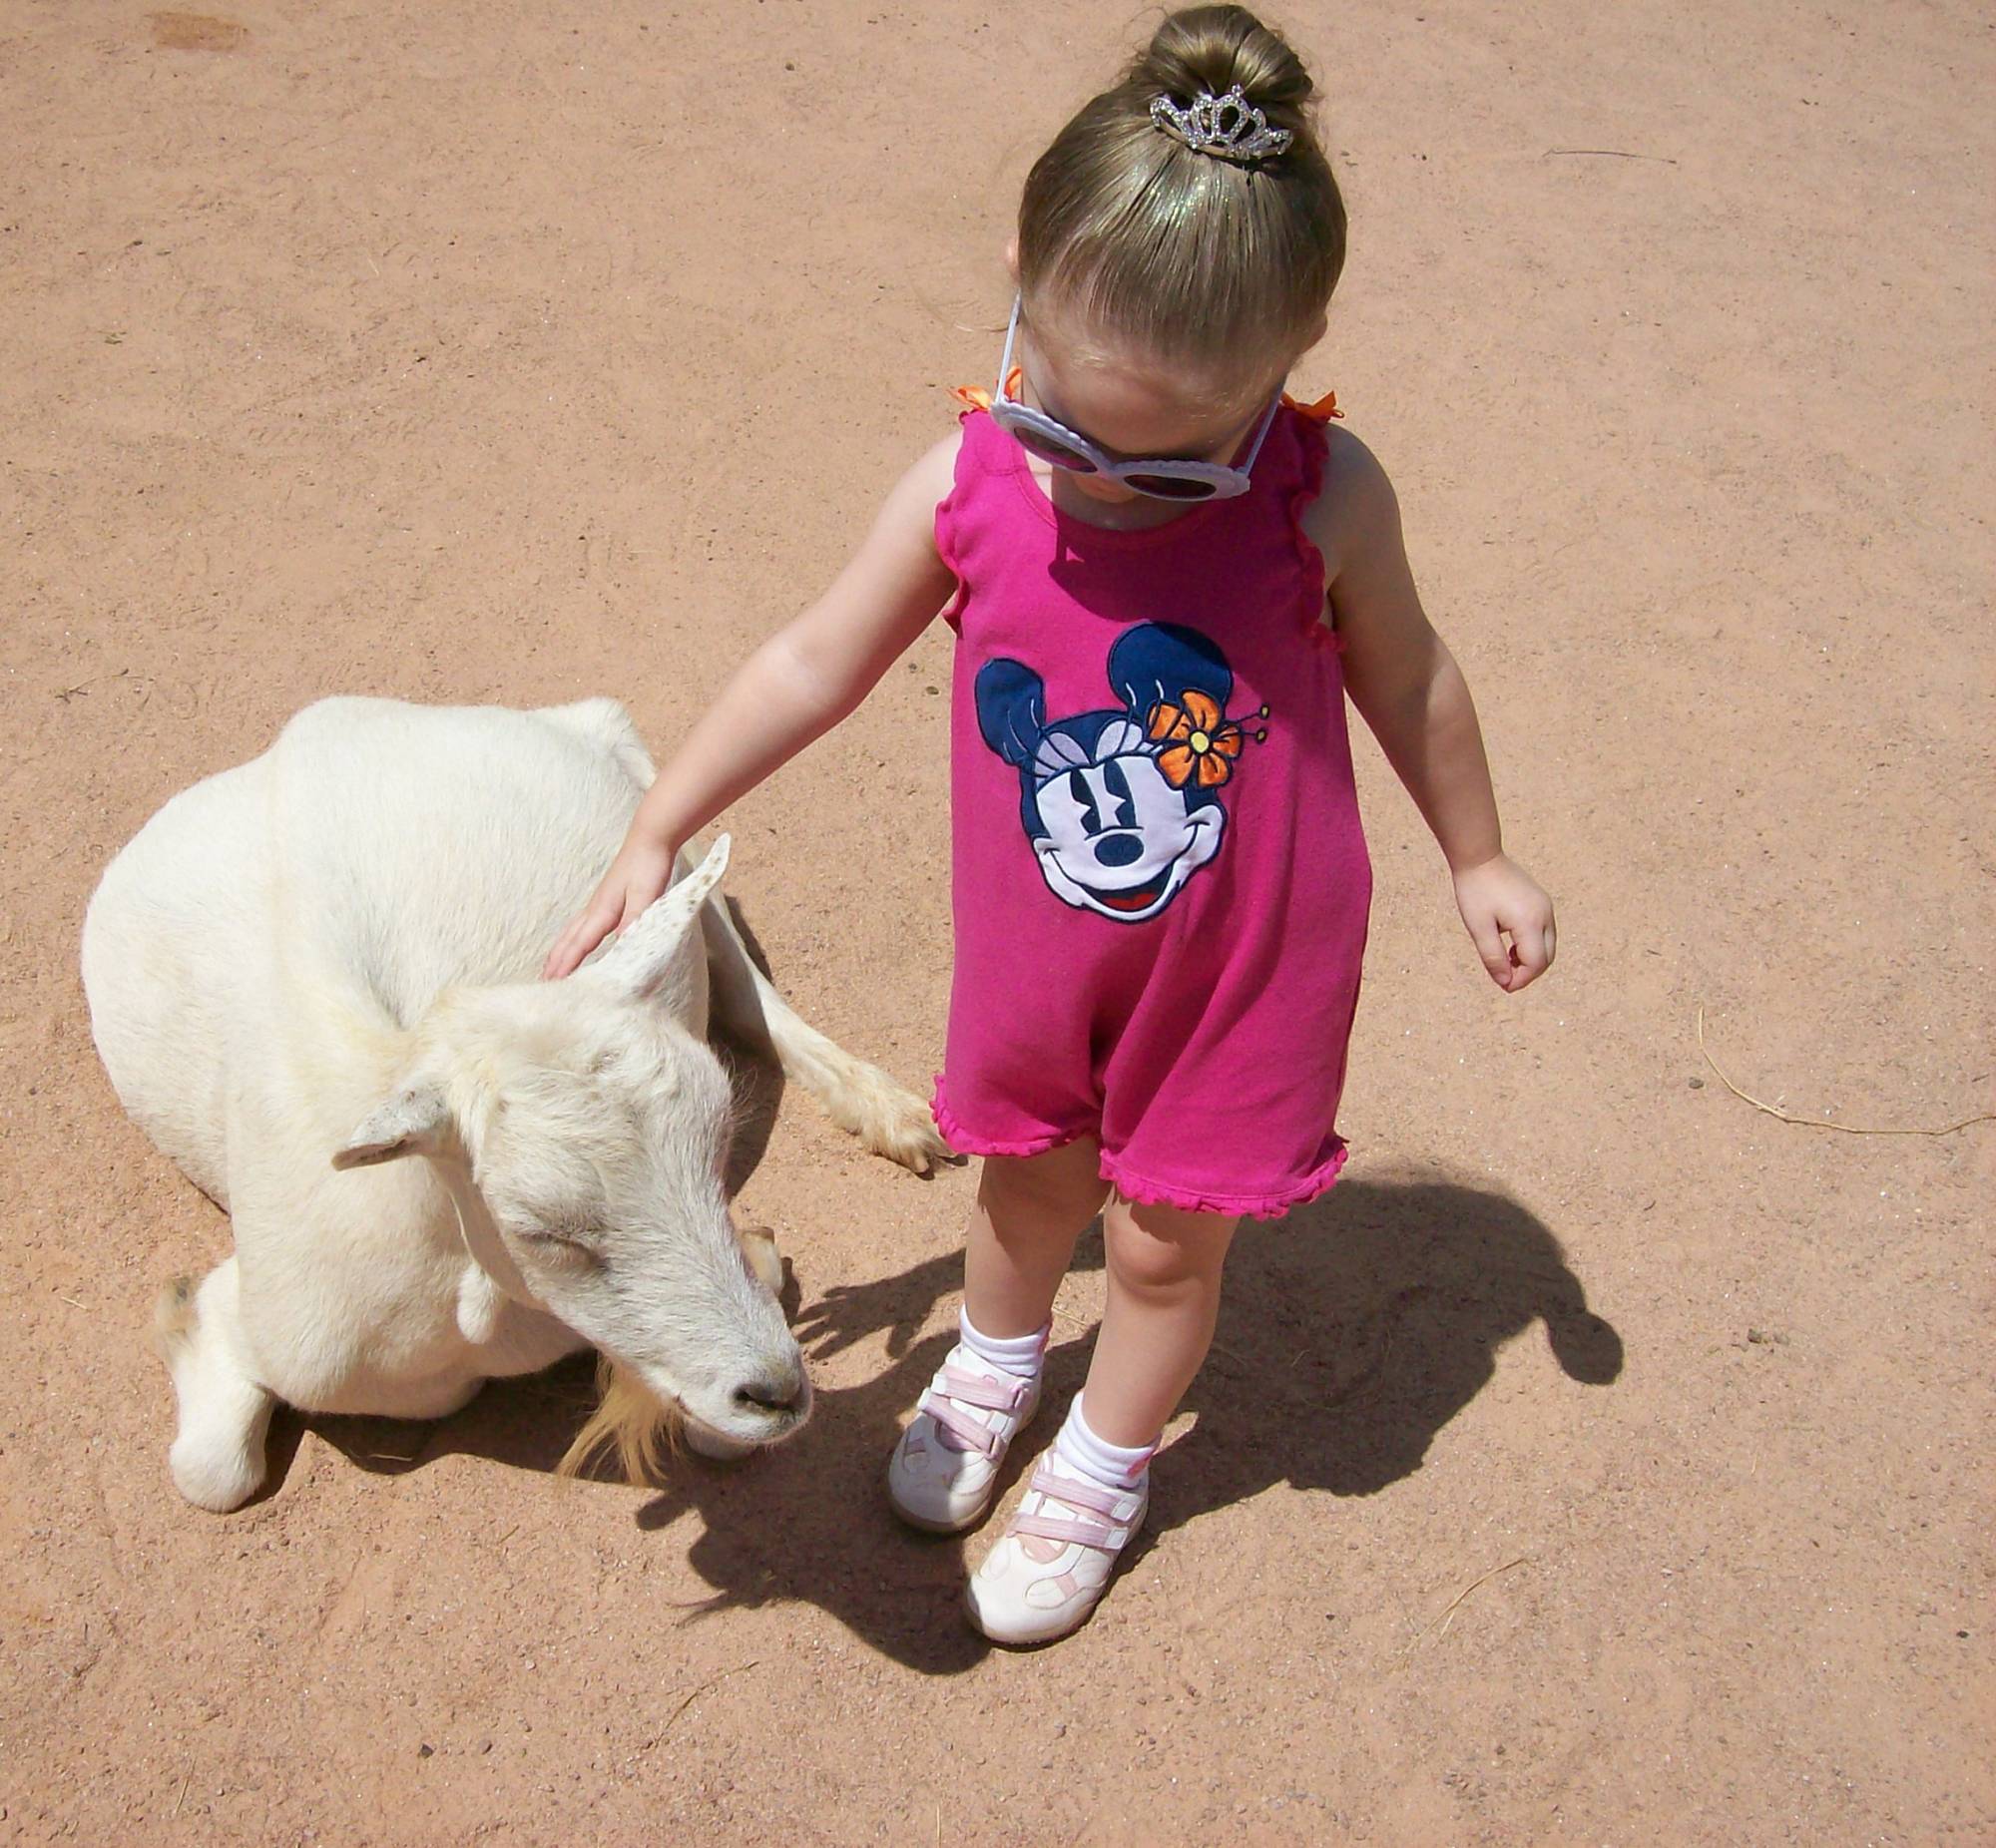 Ainsley pettng a goat at Rafiki's Planet Watch petting zoo